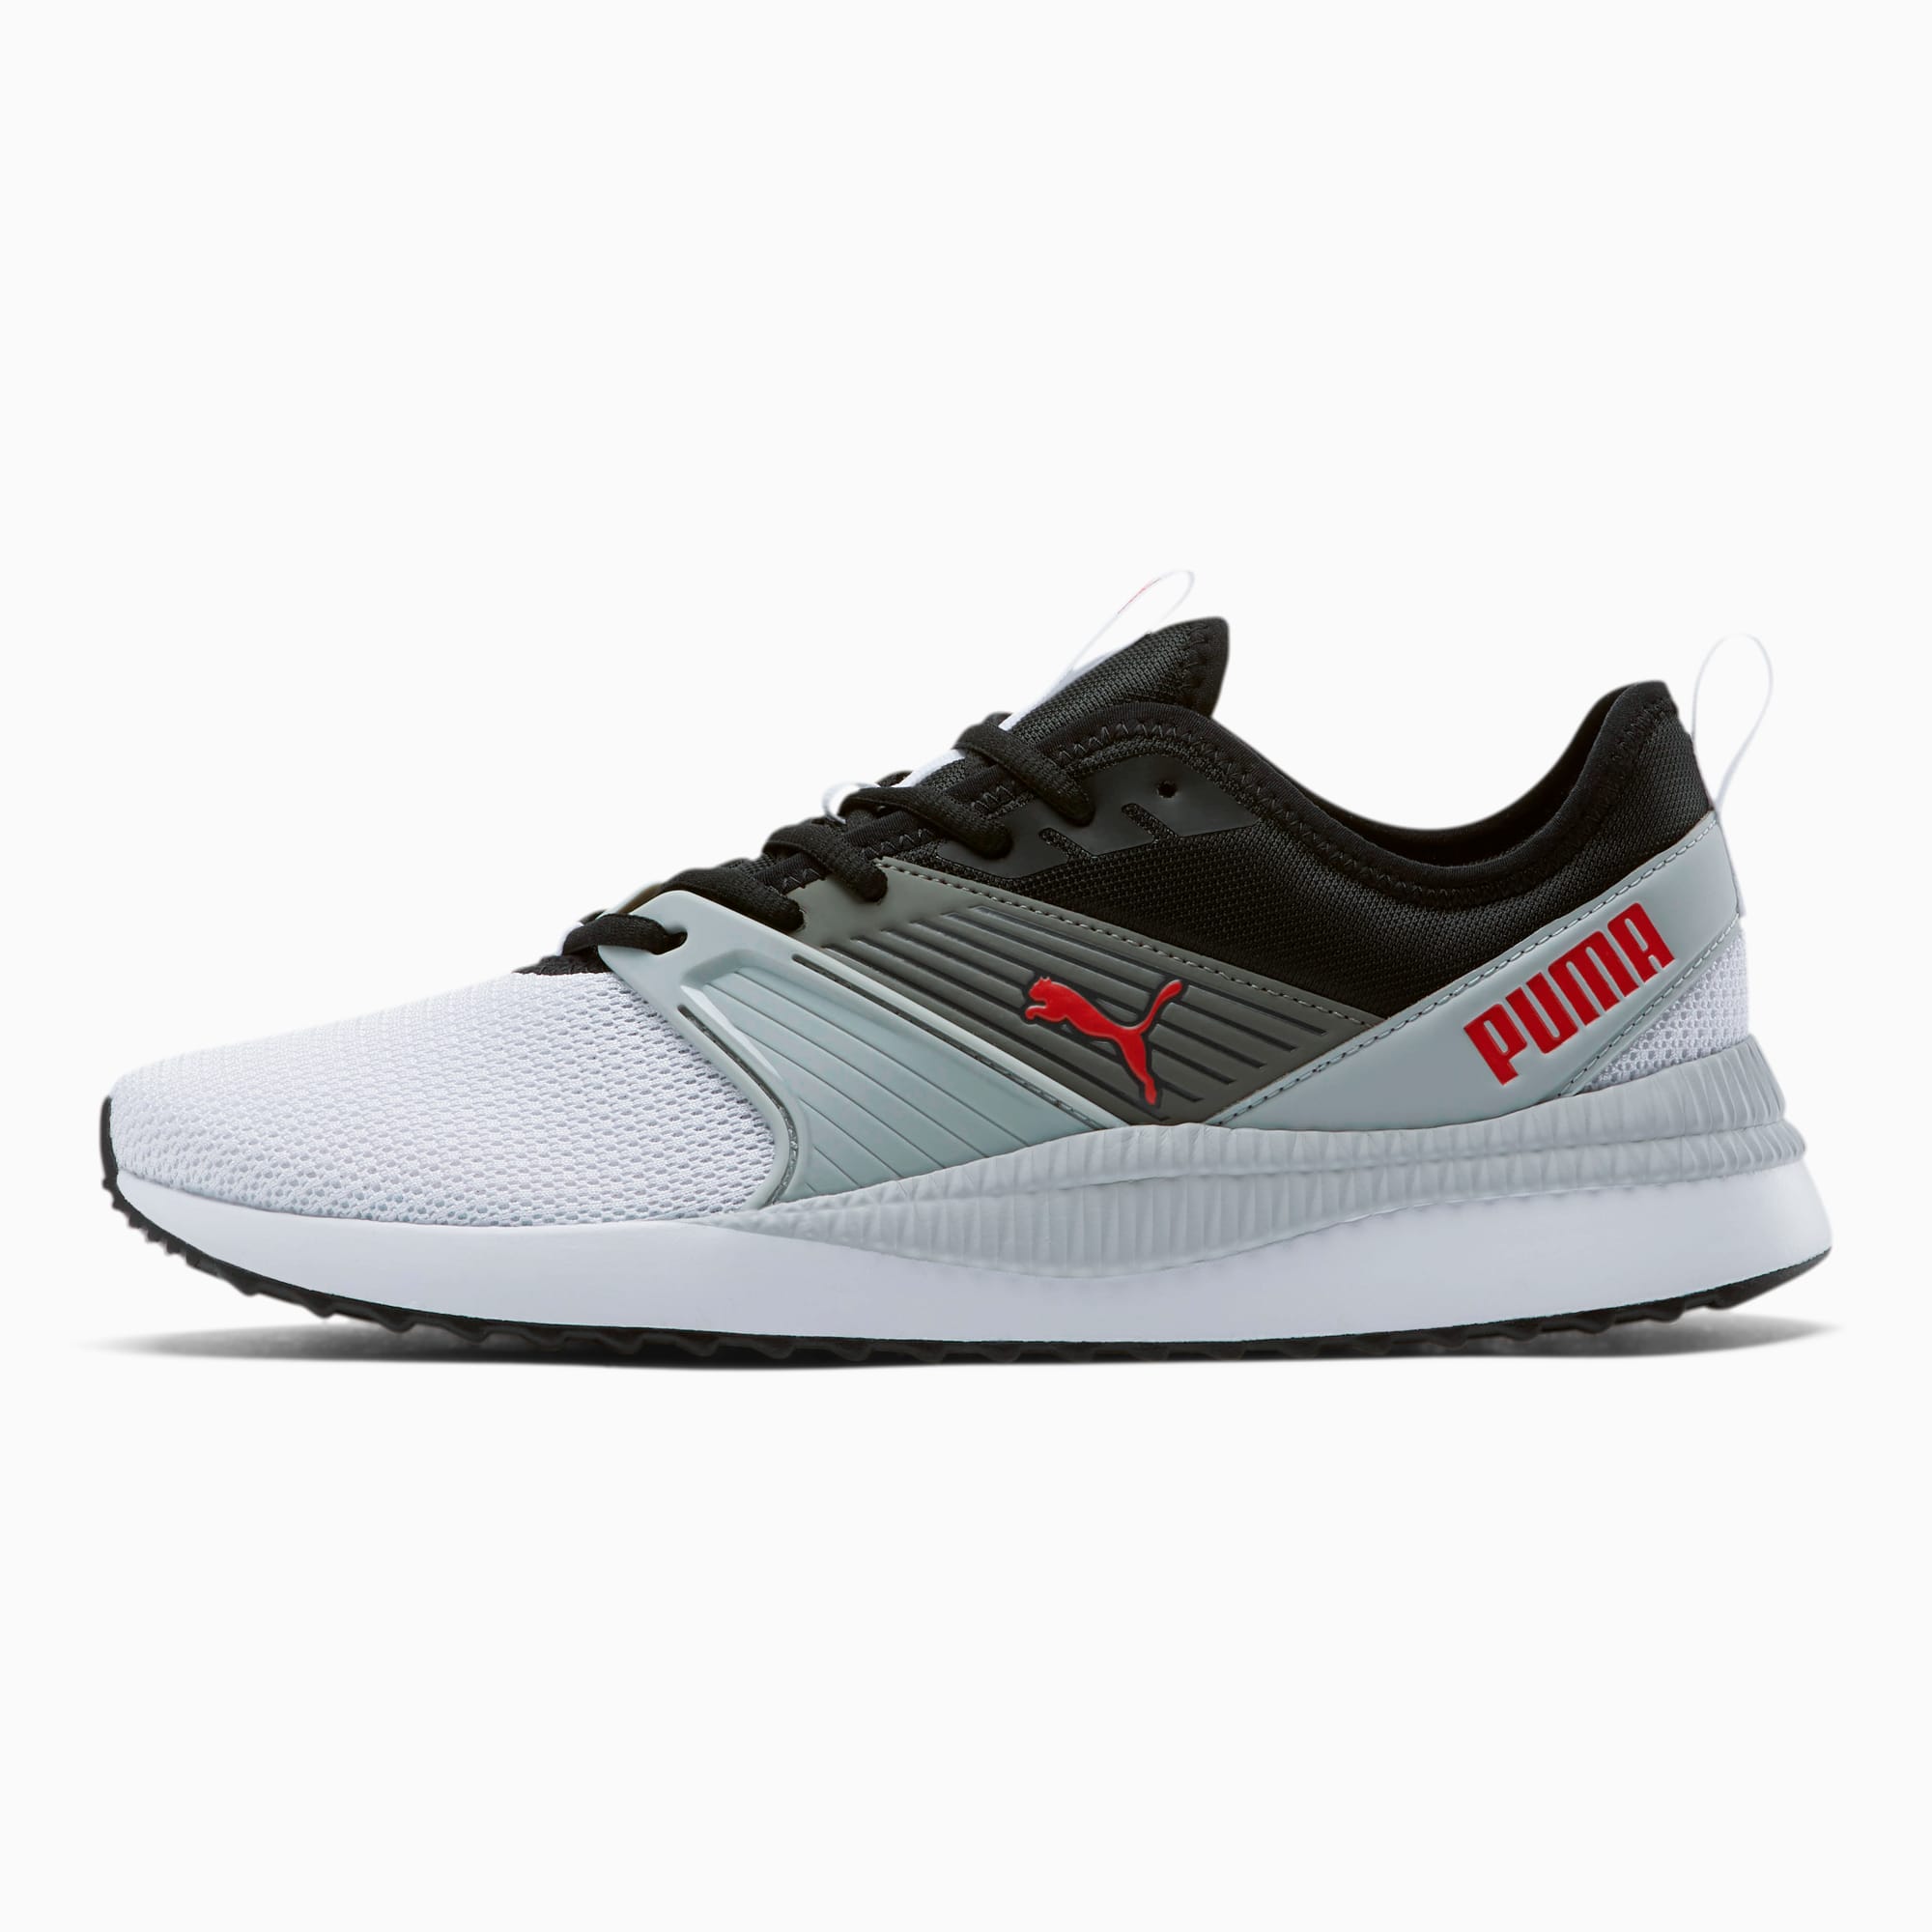 Pacer Next FFWD Men's Sneakers | PUMA US